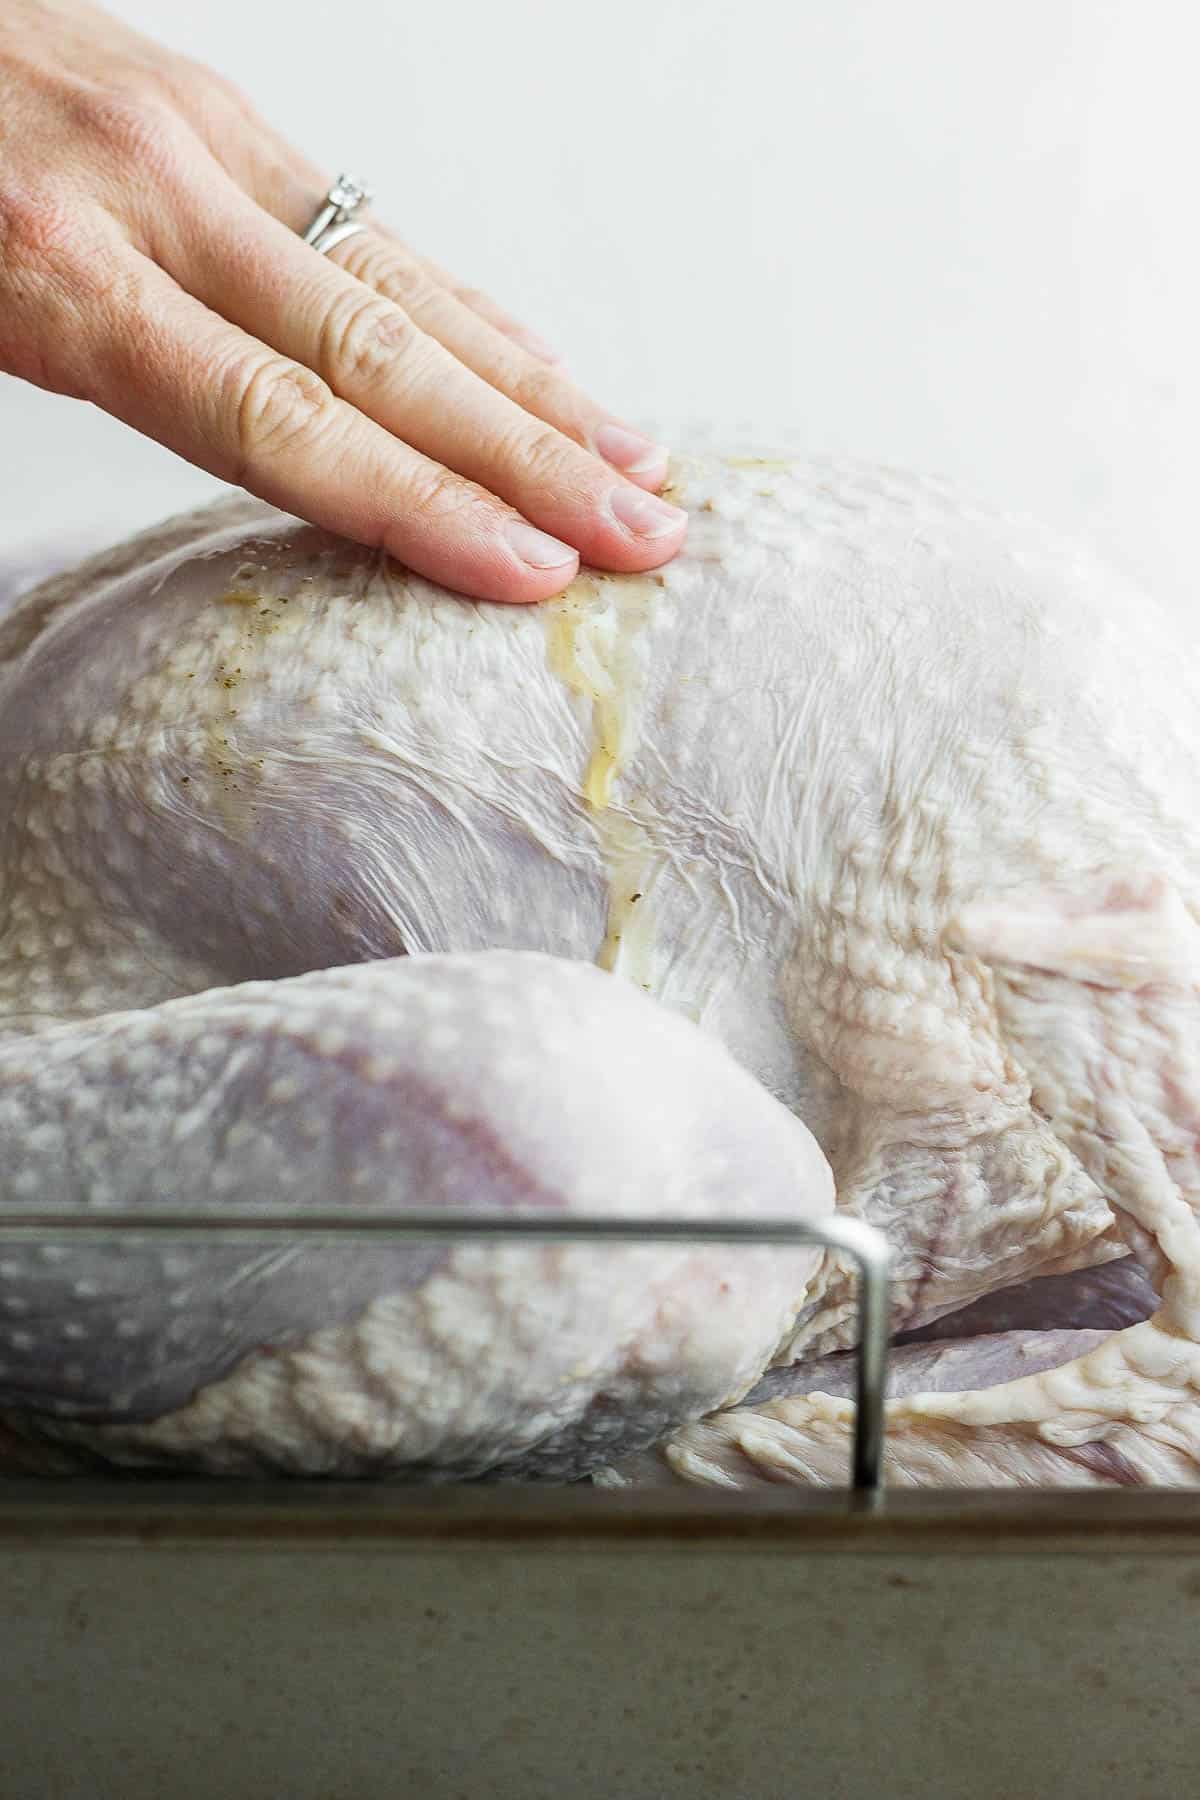 A hand rubbing the melted butter mixture into the turkey skin.